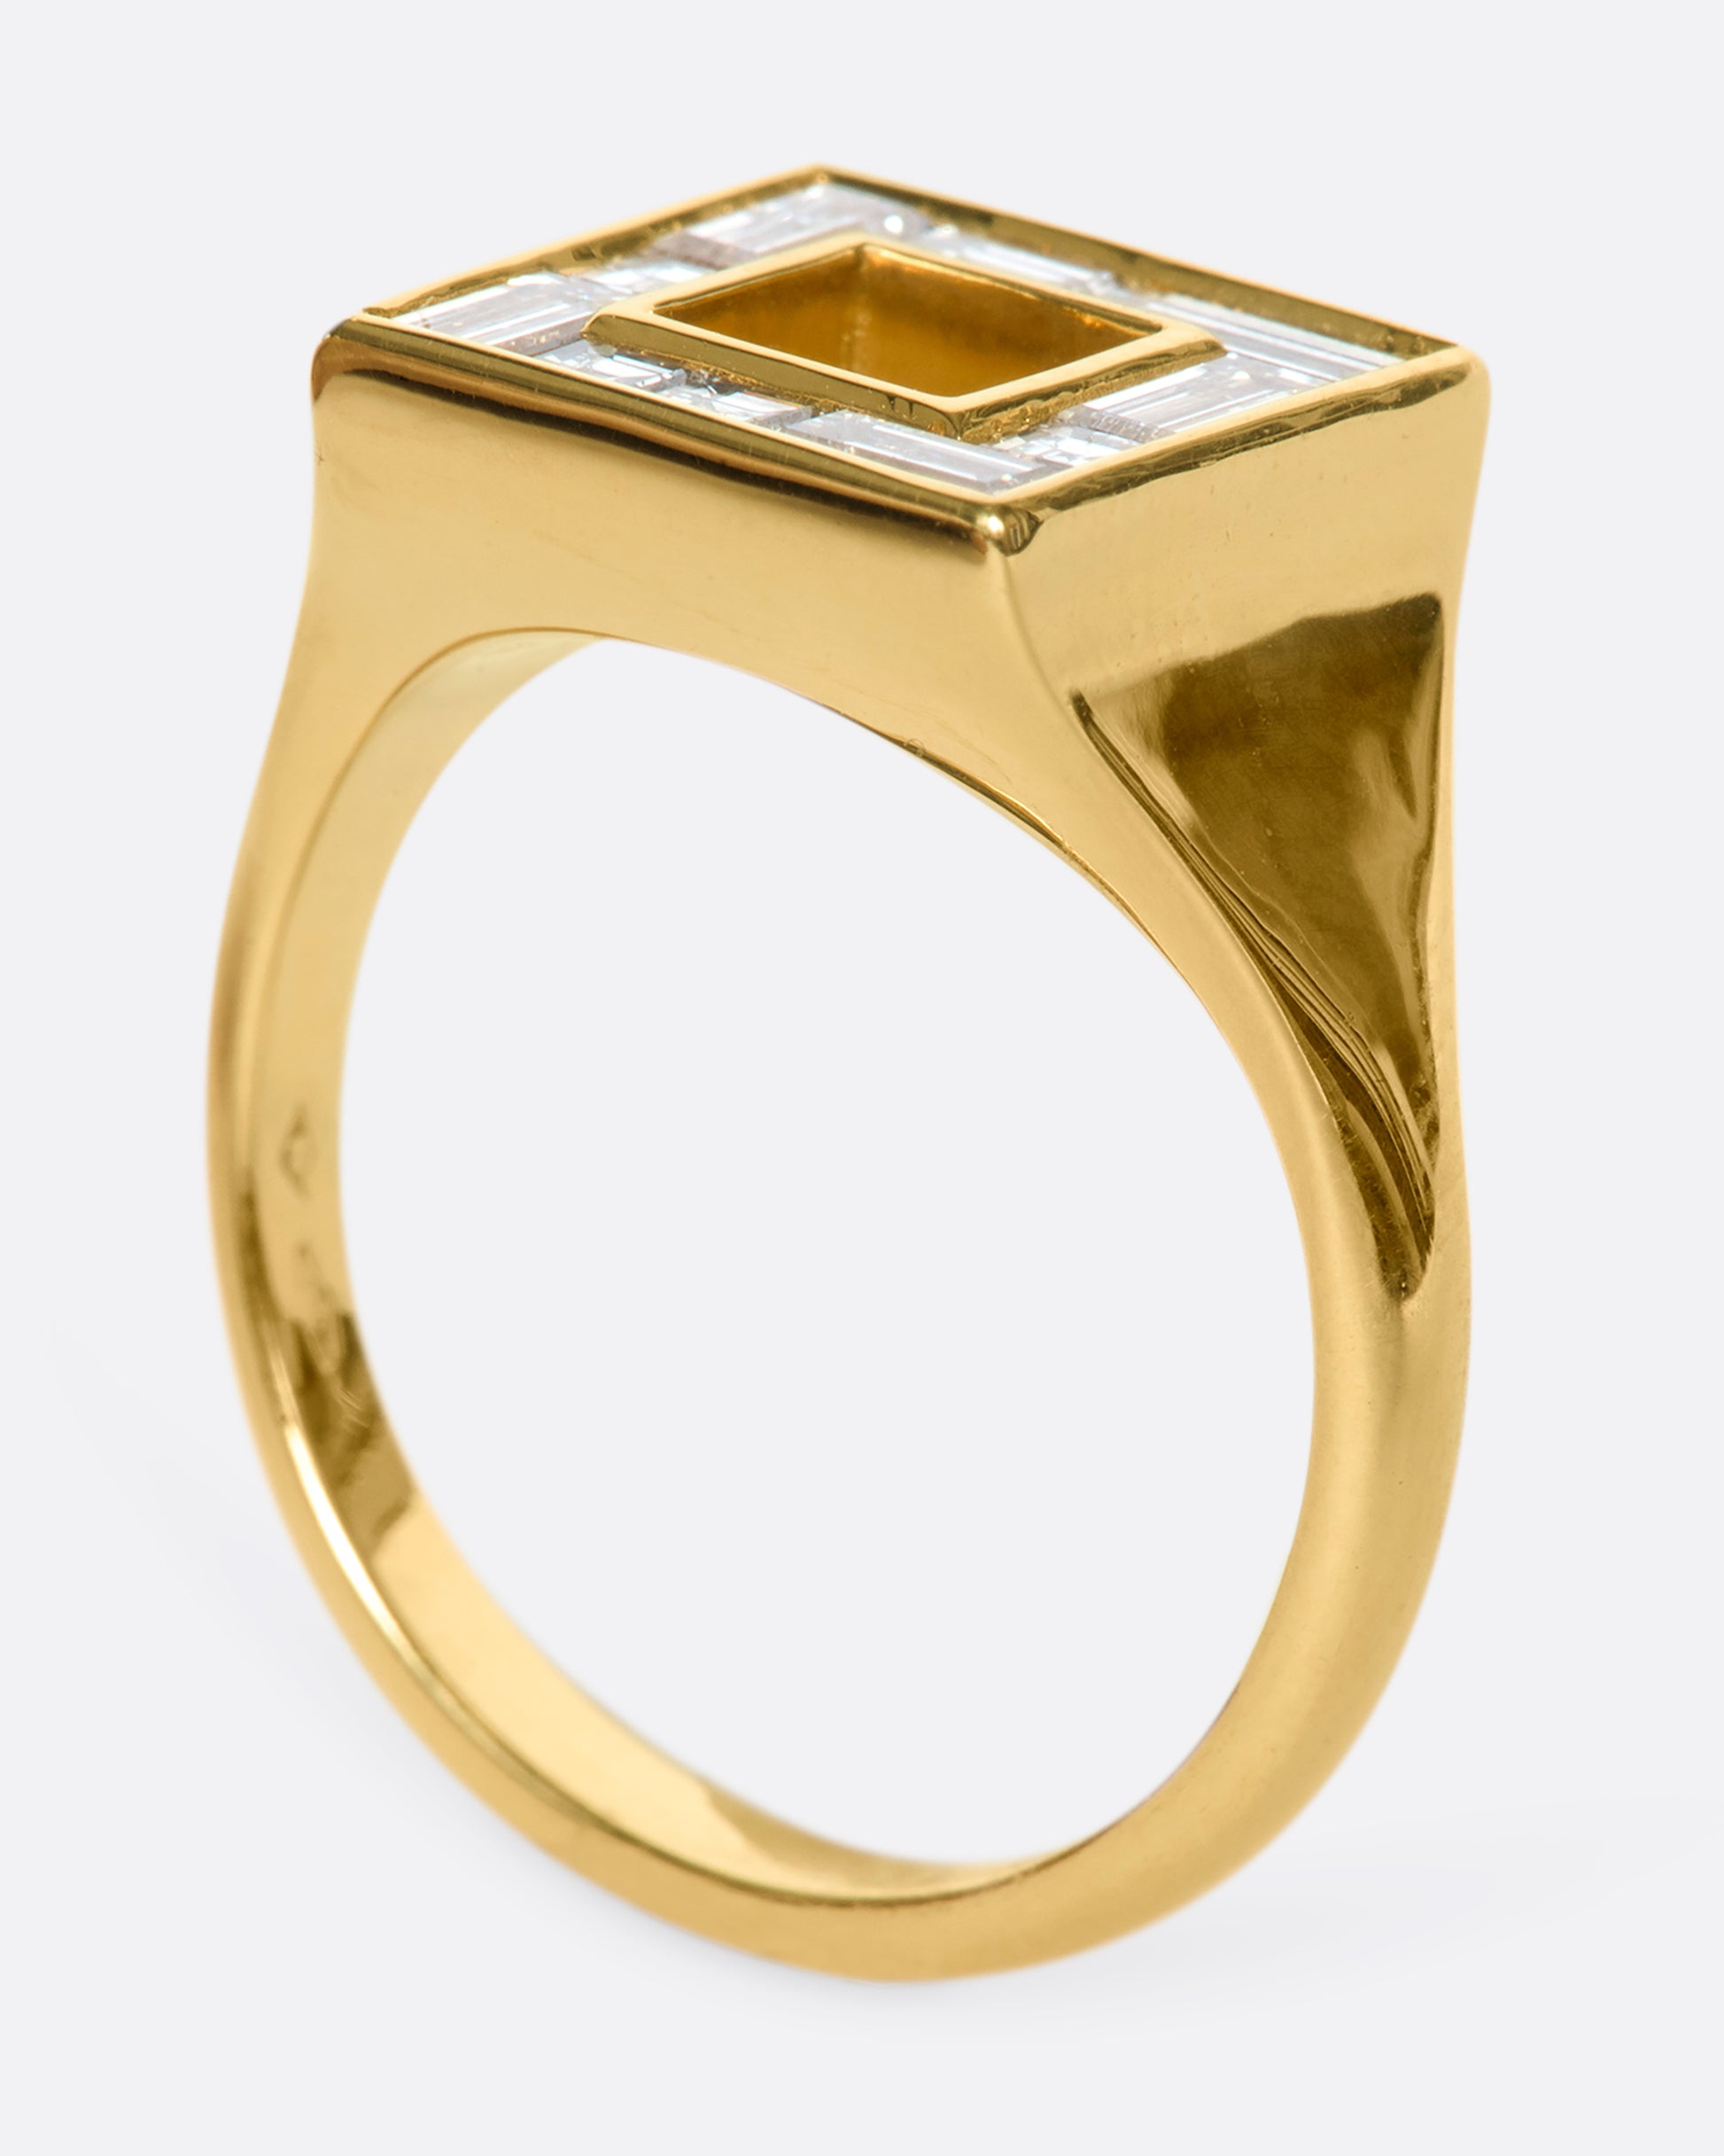 A photo of a square ring set with baguette diamonds standing on its band.